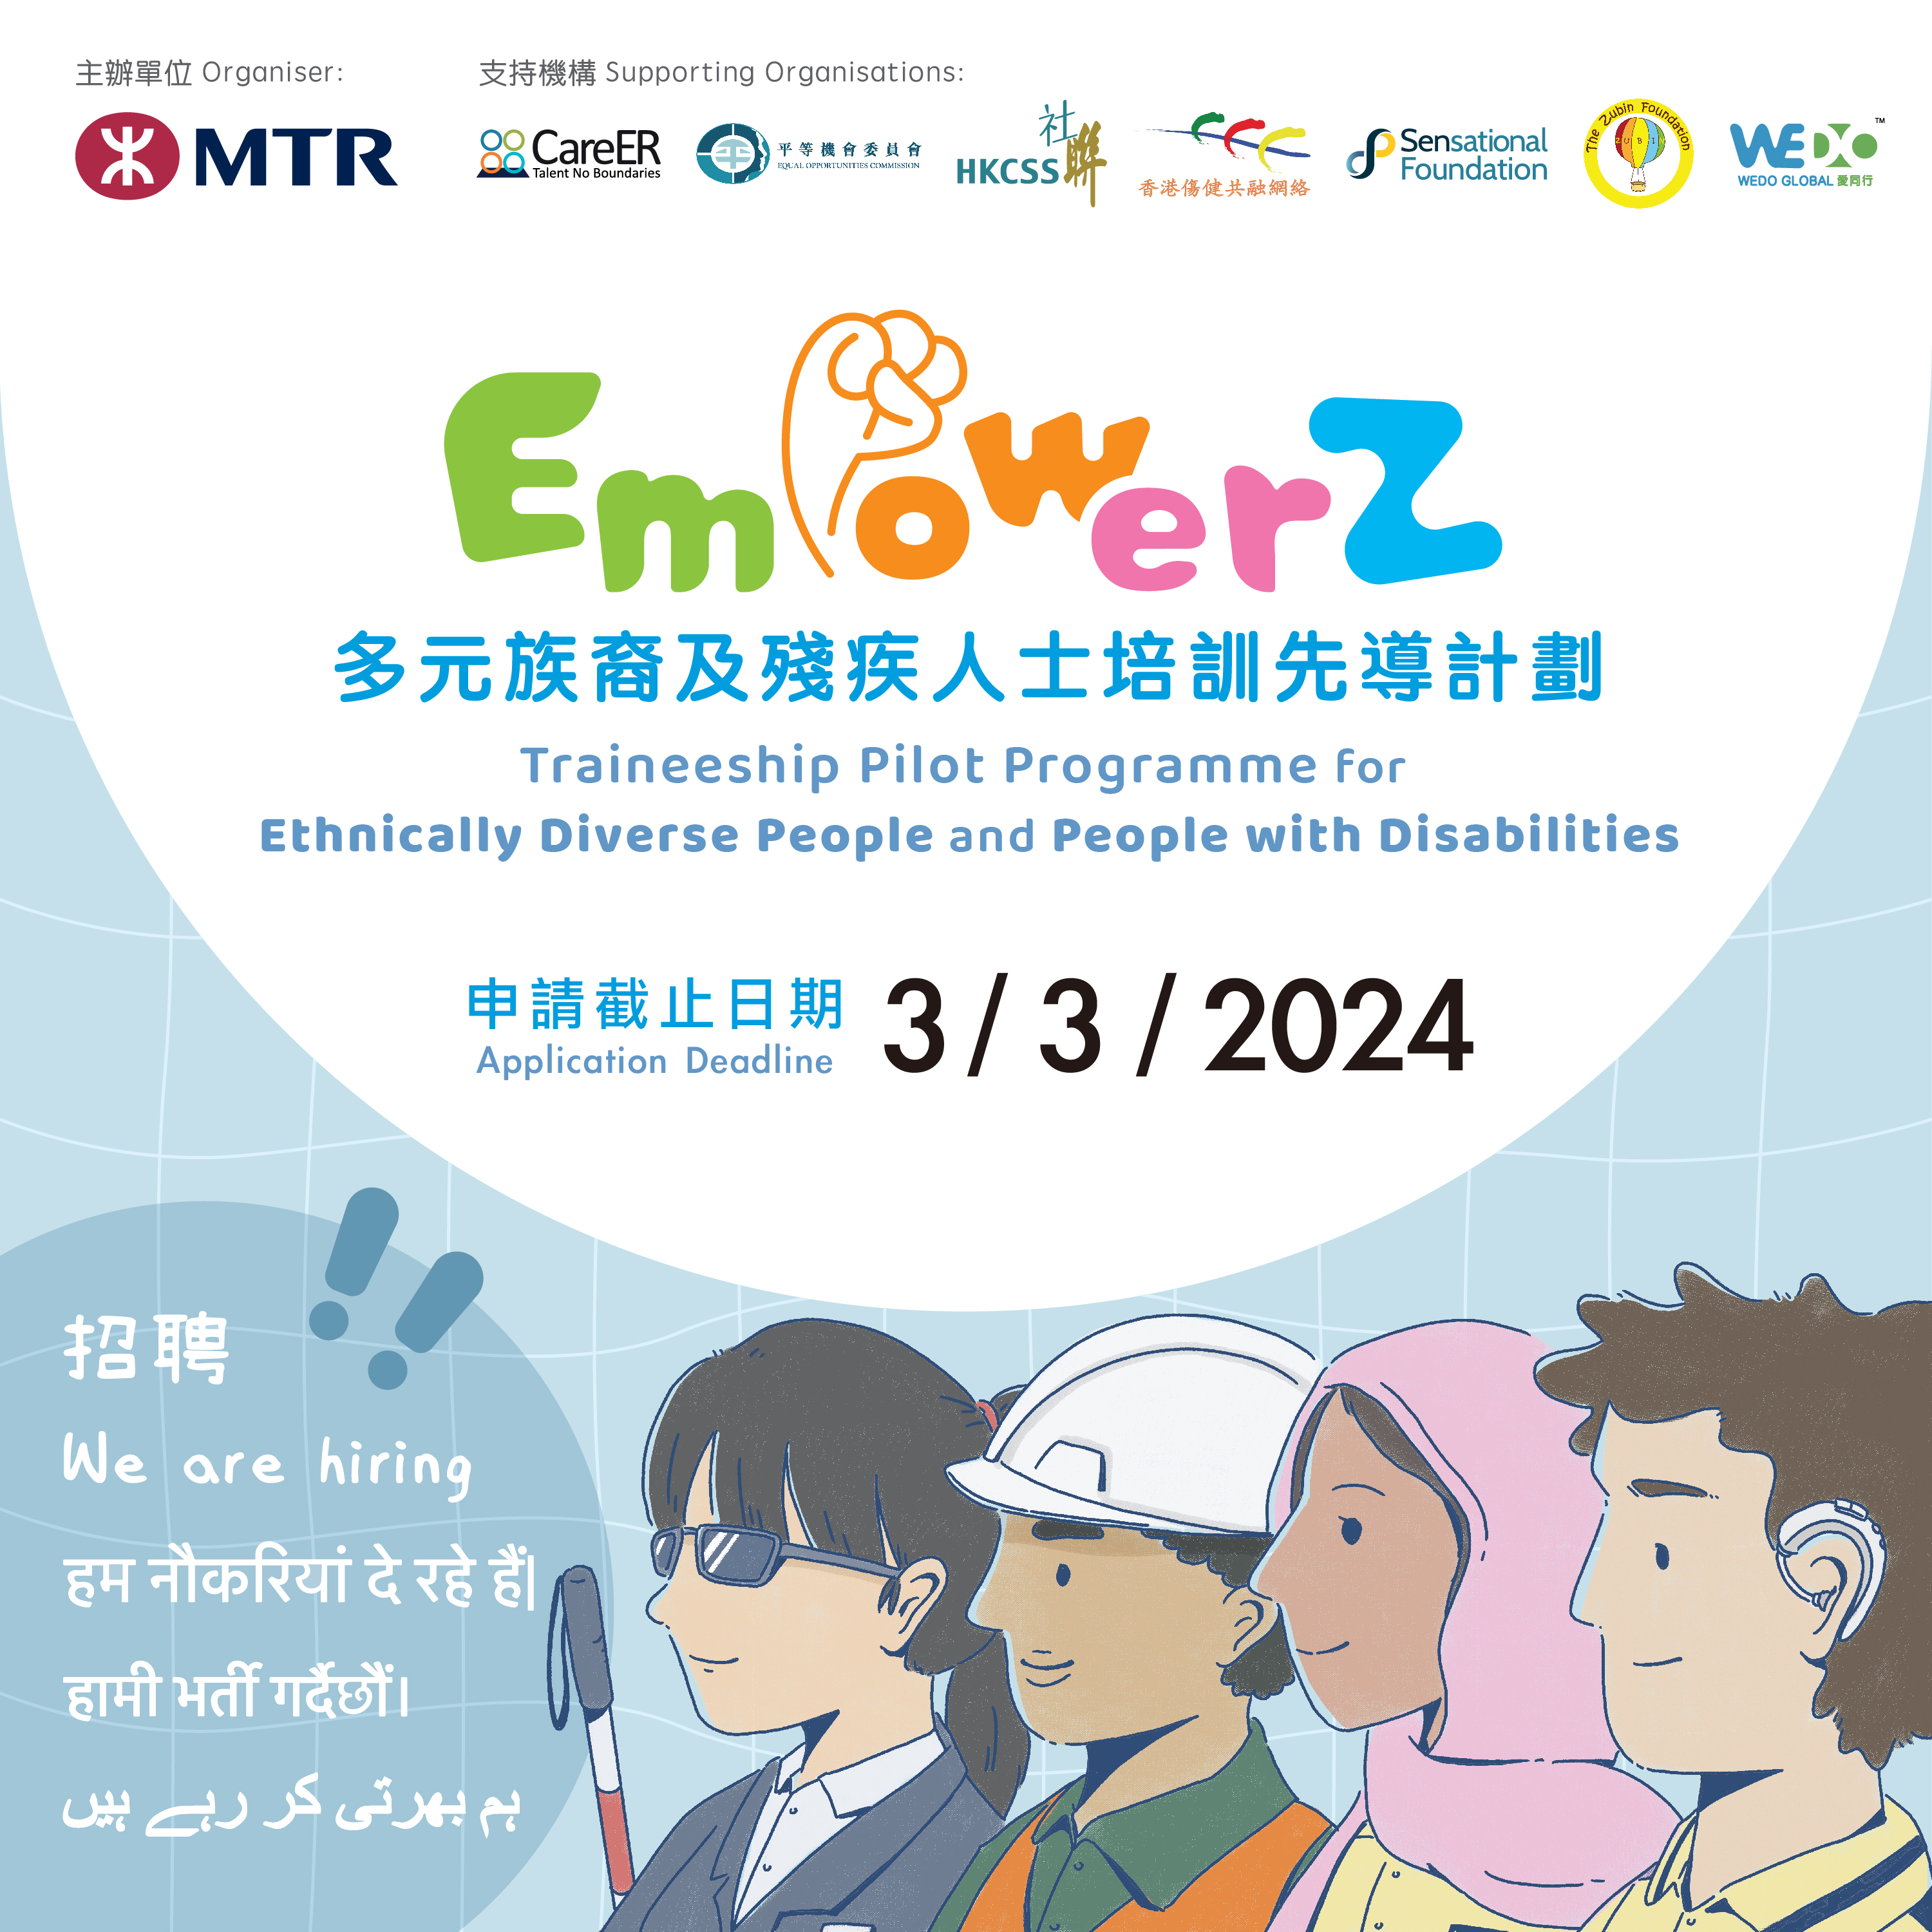 The ‘EmpowerZ Traineeship Pilot Programme’ is open for application 